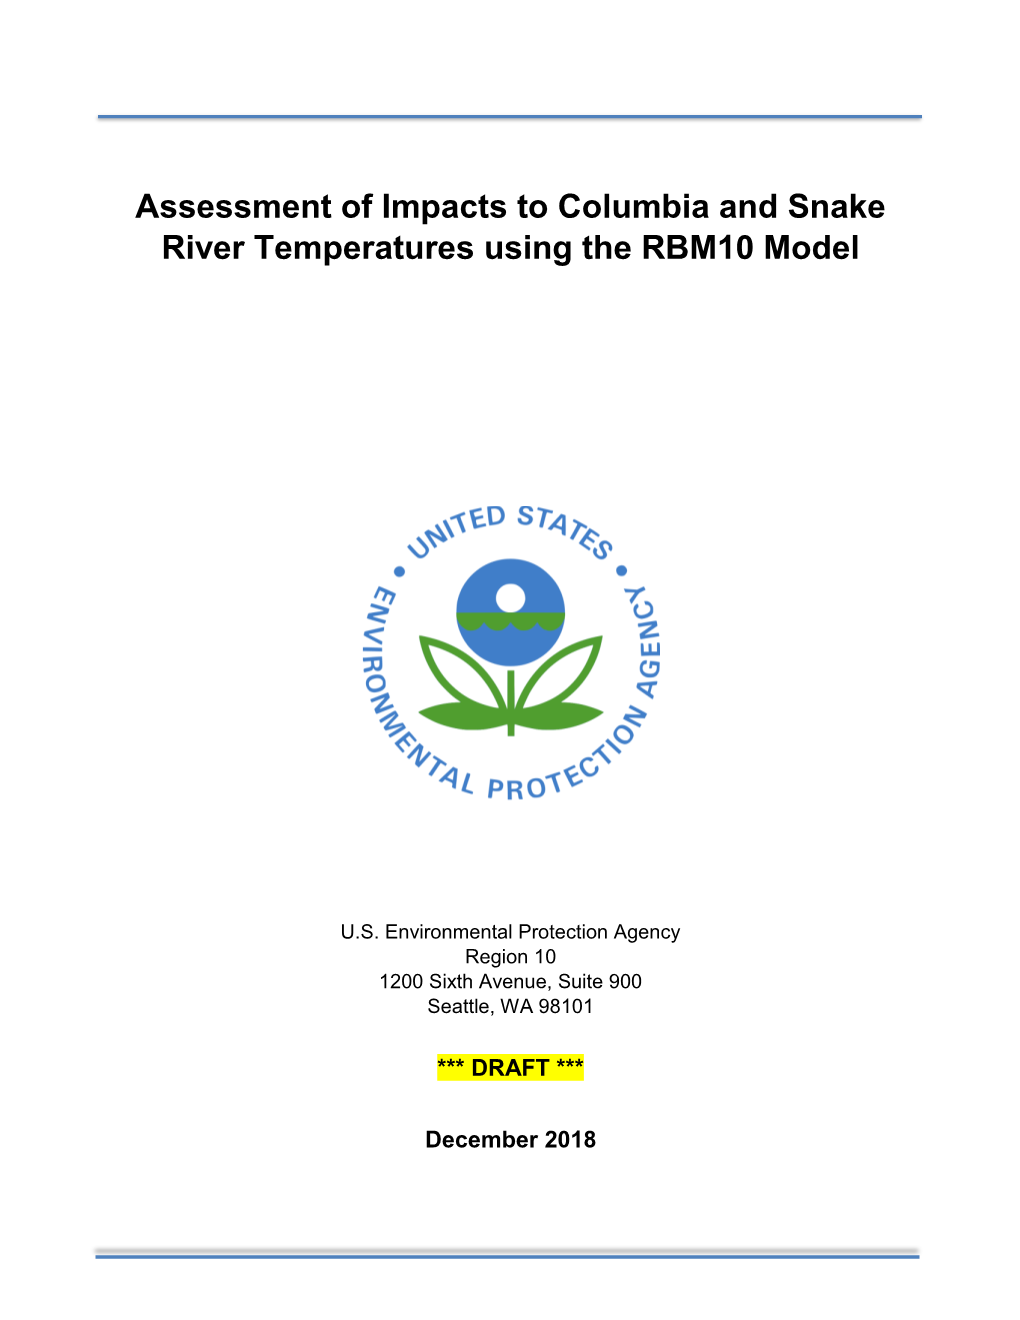 Assessment of Impacts to Columbia and Snake River Temperatures Using the RBM10 Model